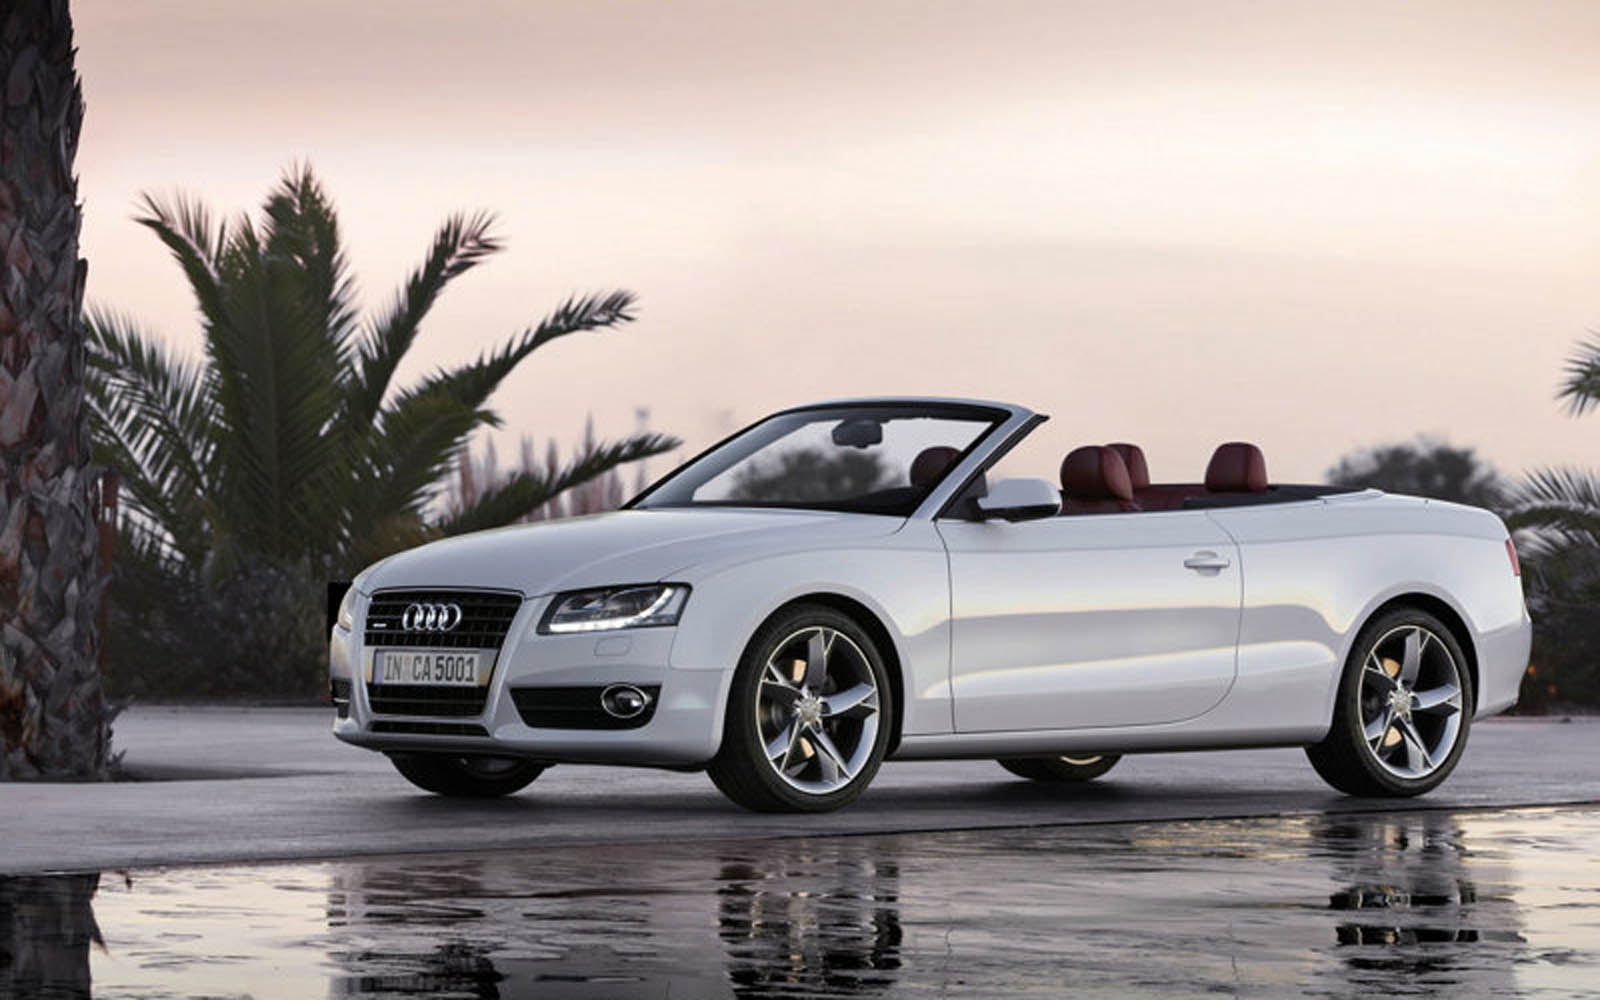 Tag Audi A5 Cabriolet Car Wallpaper Background Photos Image And